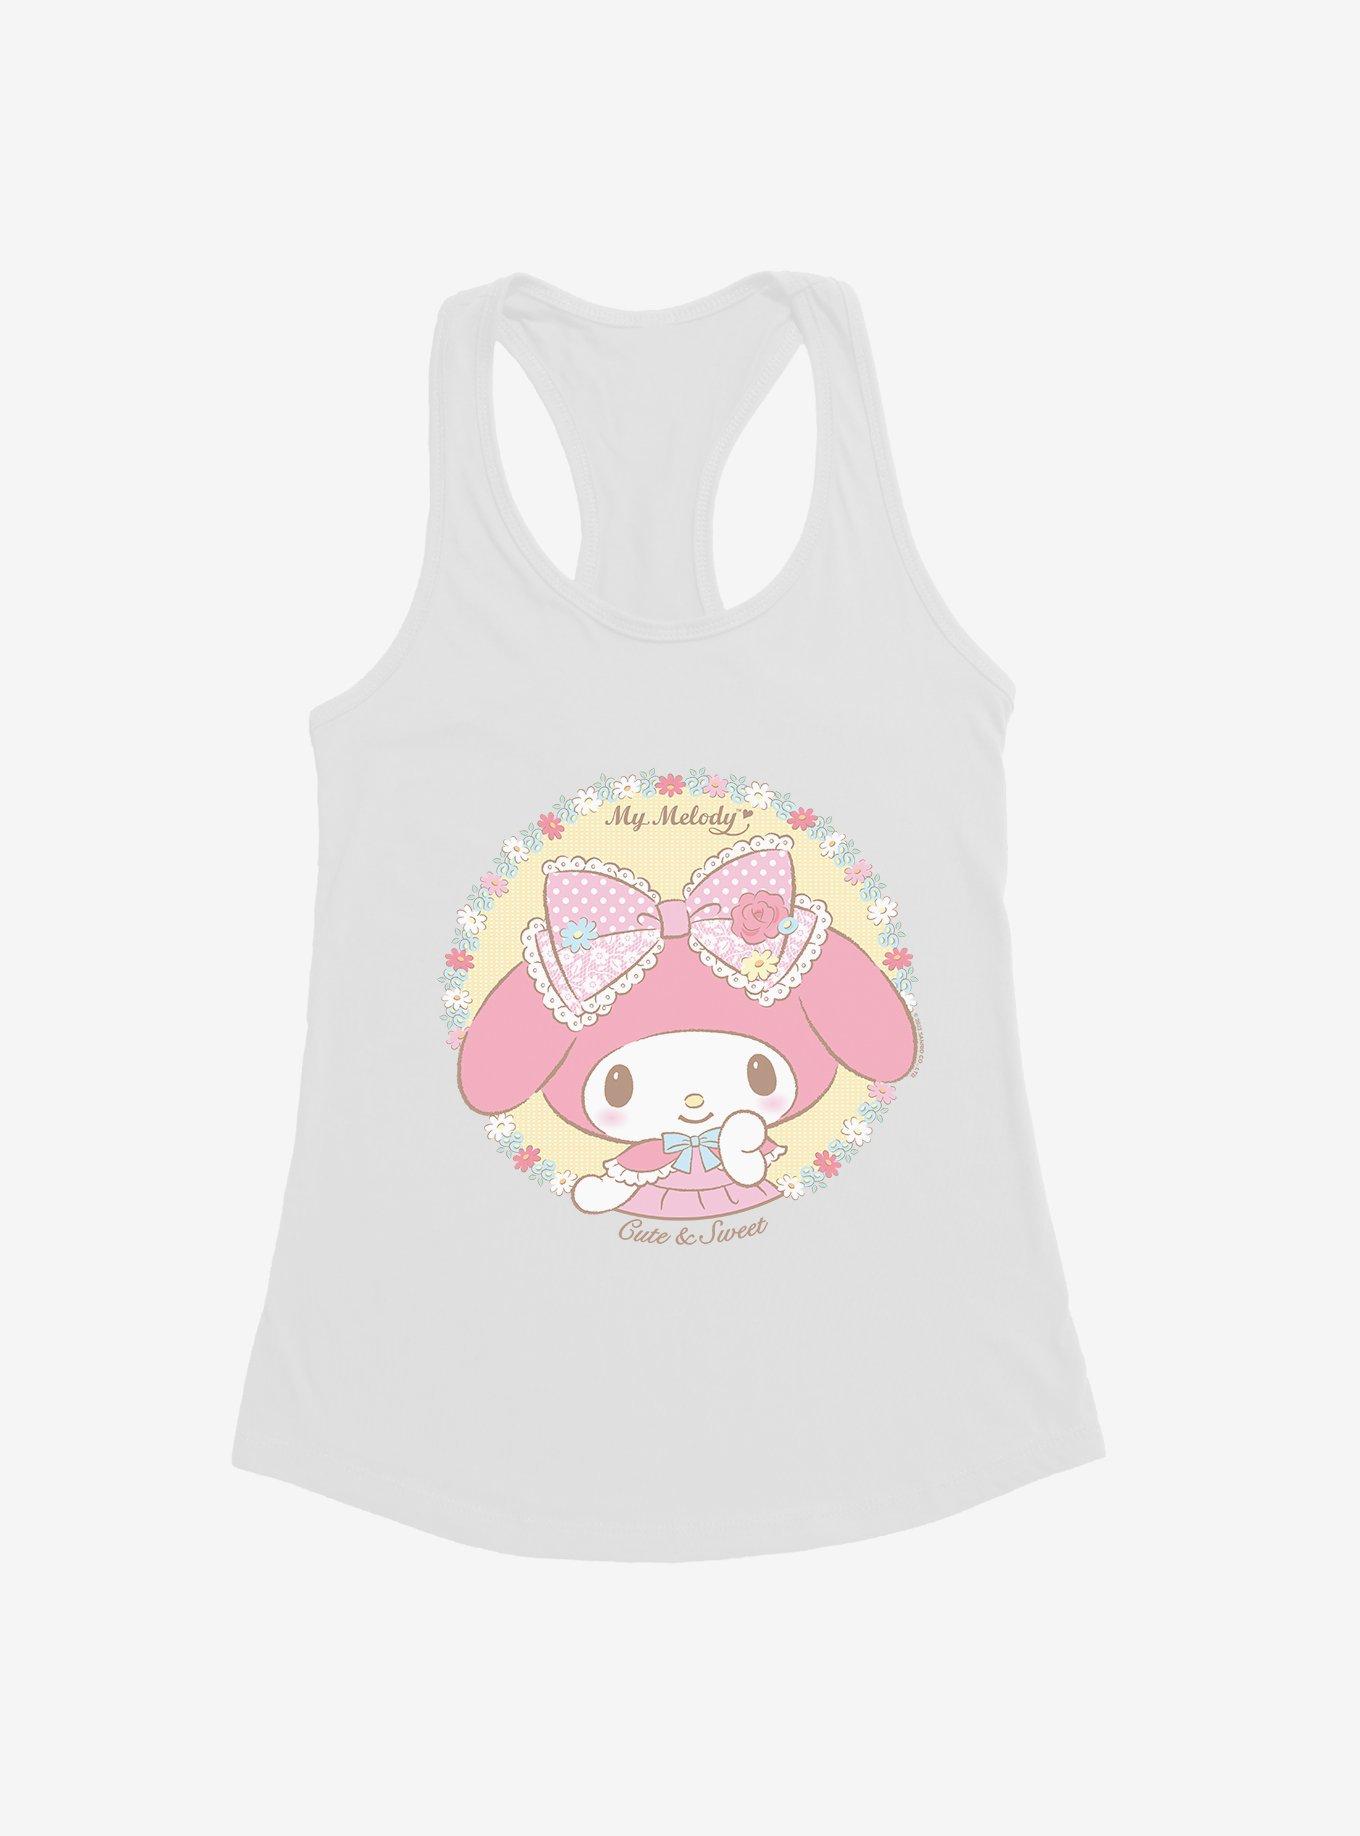 My Melody Cute & Sweet Womens Tank Top, WHITE, hi-res